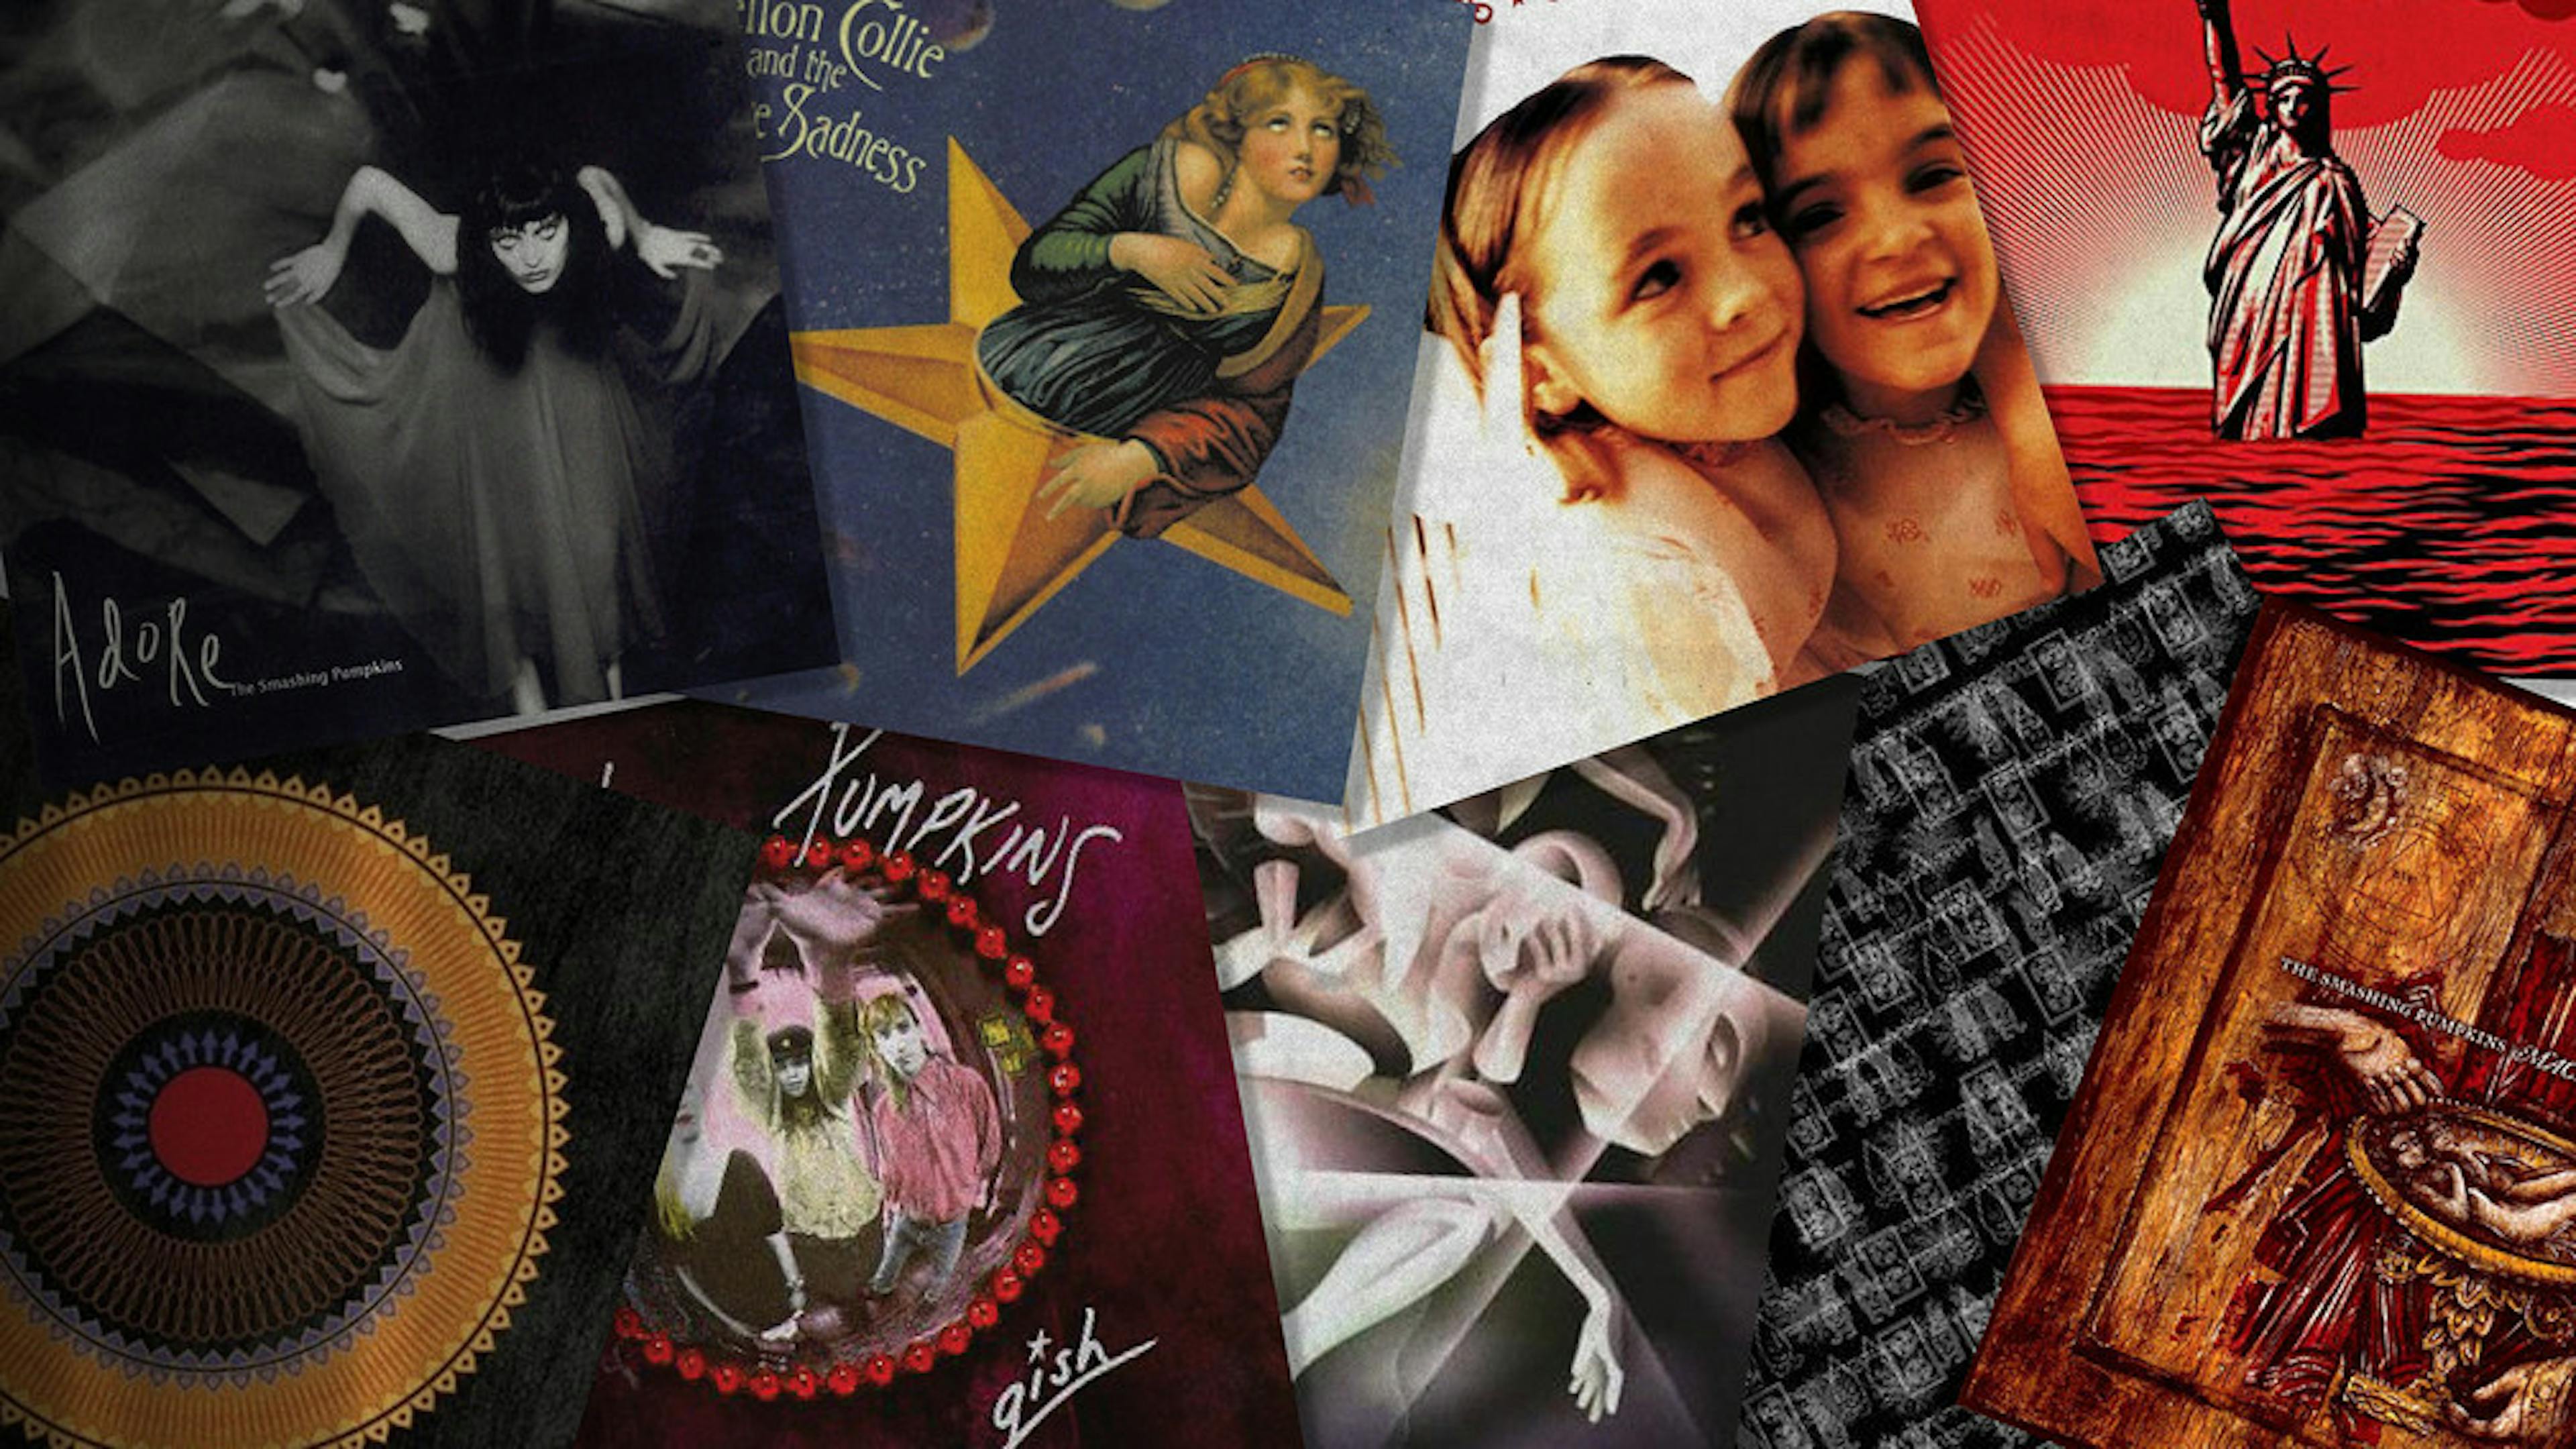 The Smashing Pumpkins: Every Album Ranked From Worst To Best